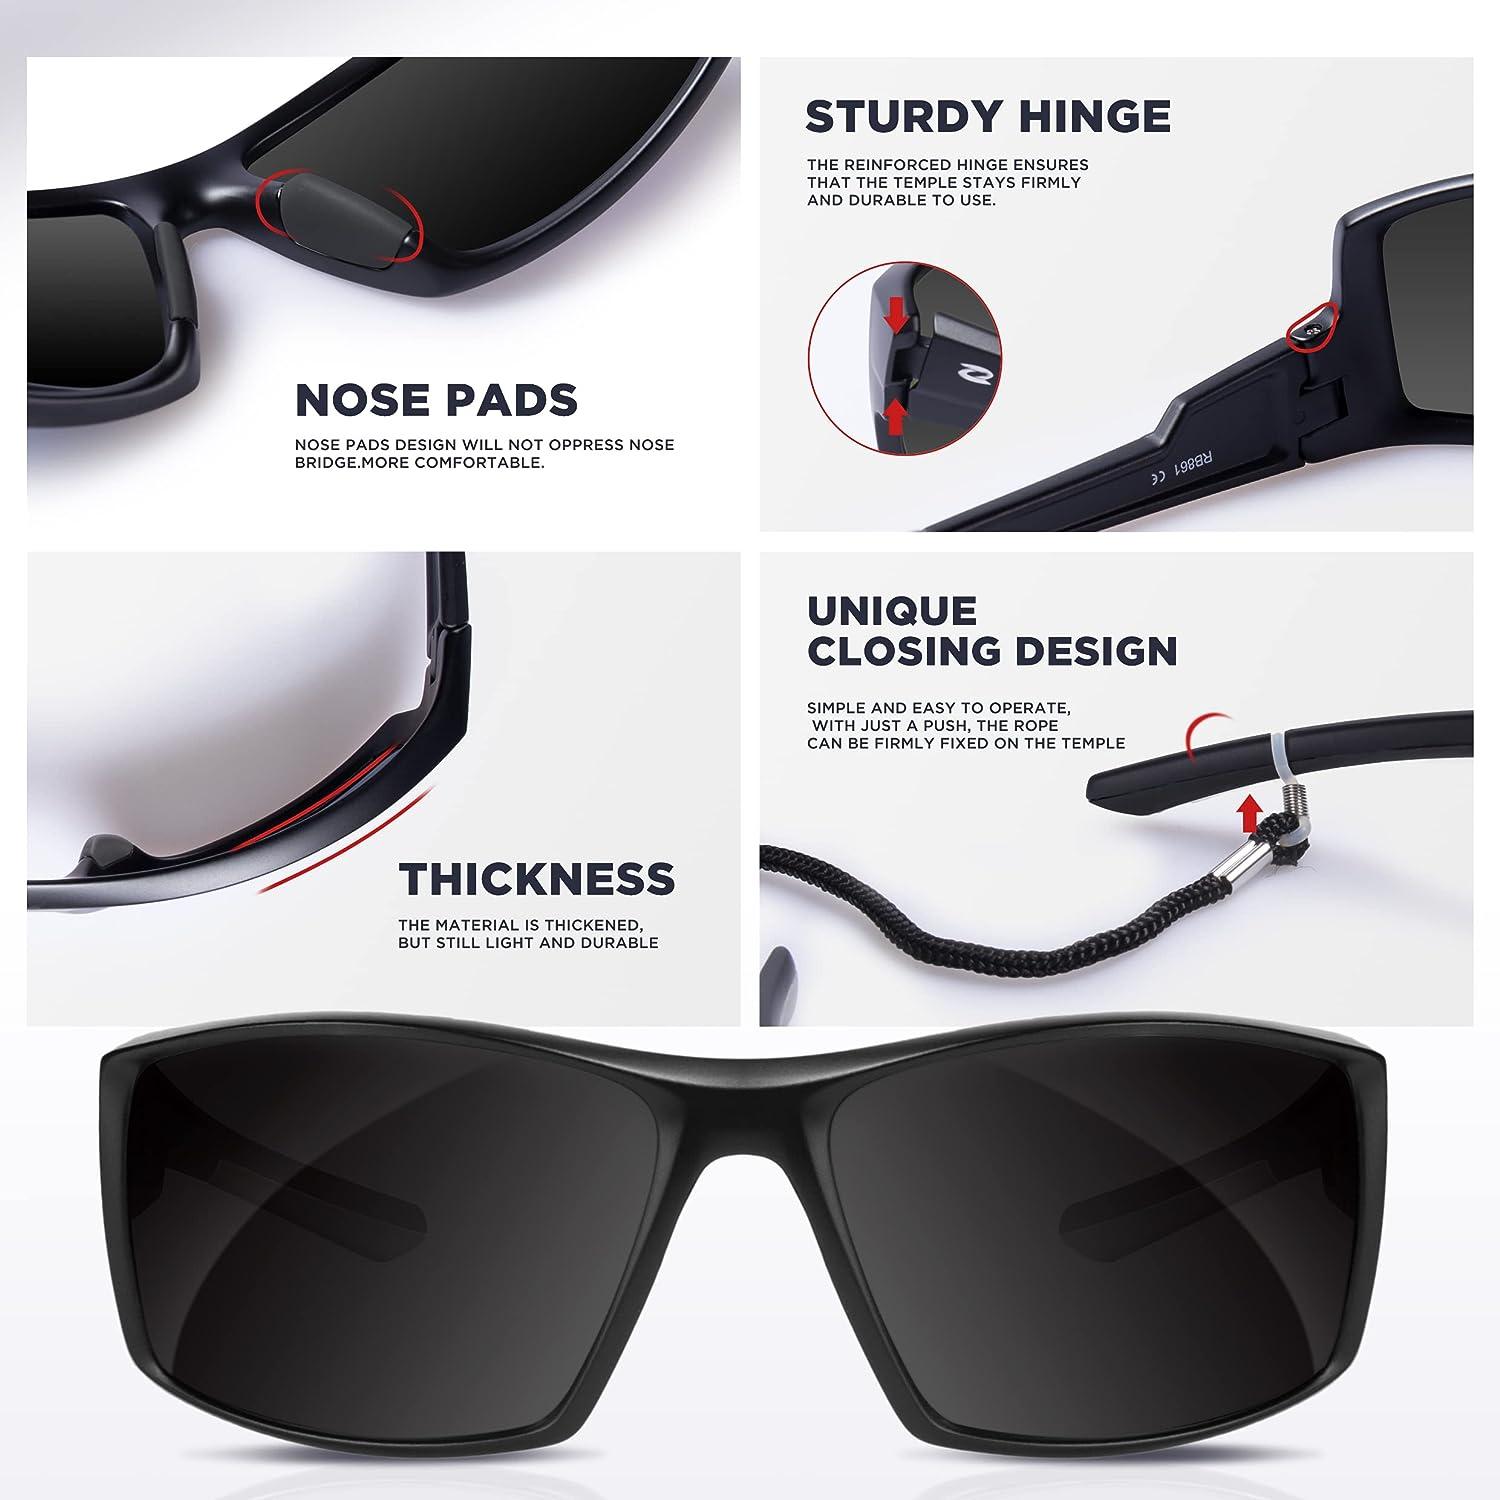 RIVBOS Polarized Sports Sunglasses Driving shades For Men TR90 Unbreakable  Frame RBS861 Rbs861- Full Black Large